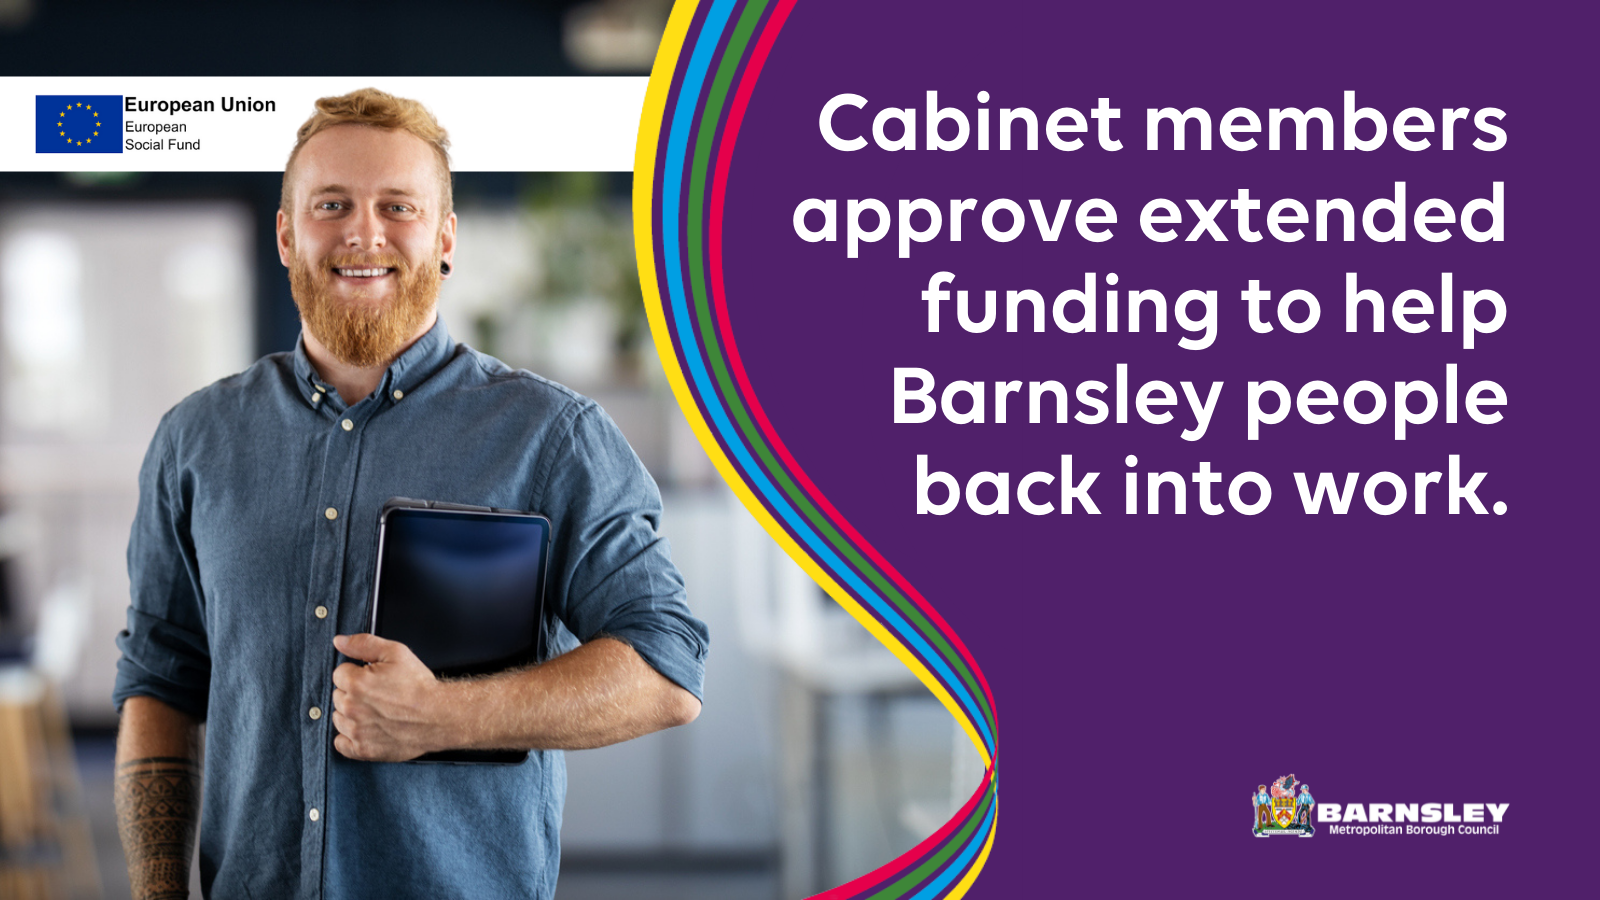 Cabinet members approve extended funding to help Barnsley people back into work.png